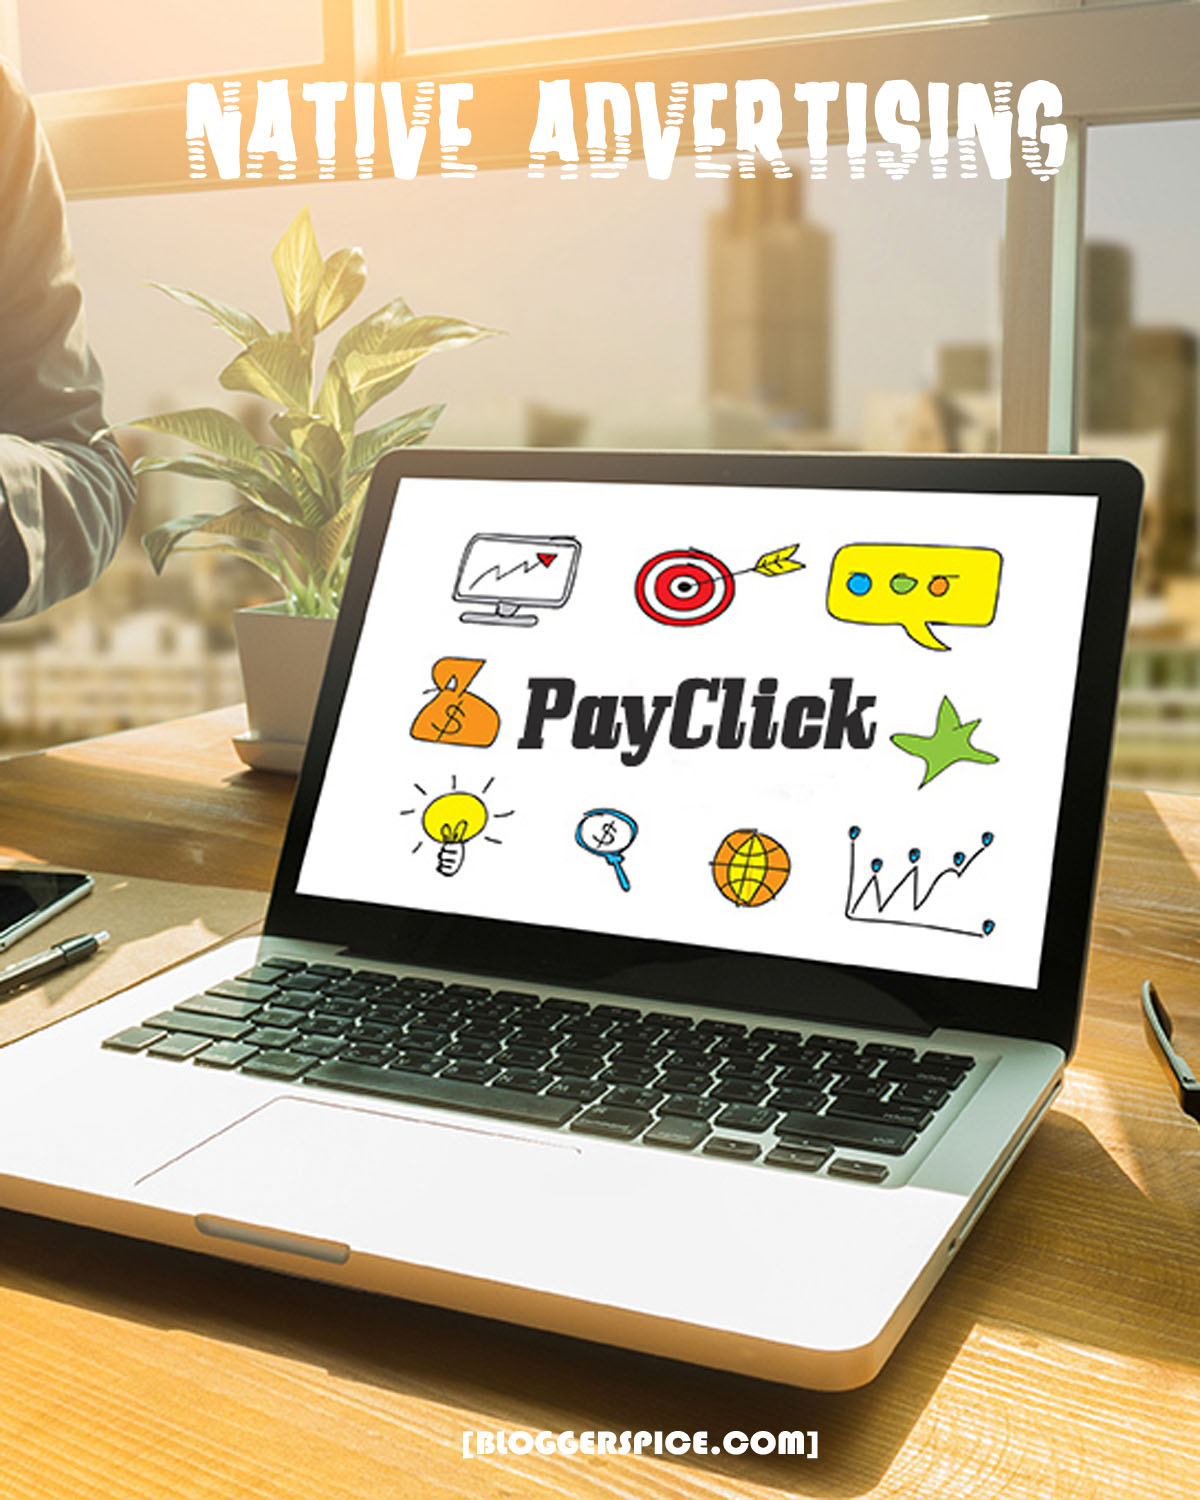 PayClick trusted Review: Is it Legit Money Making Native Advertising Network?